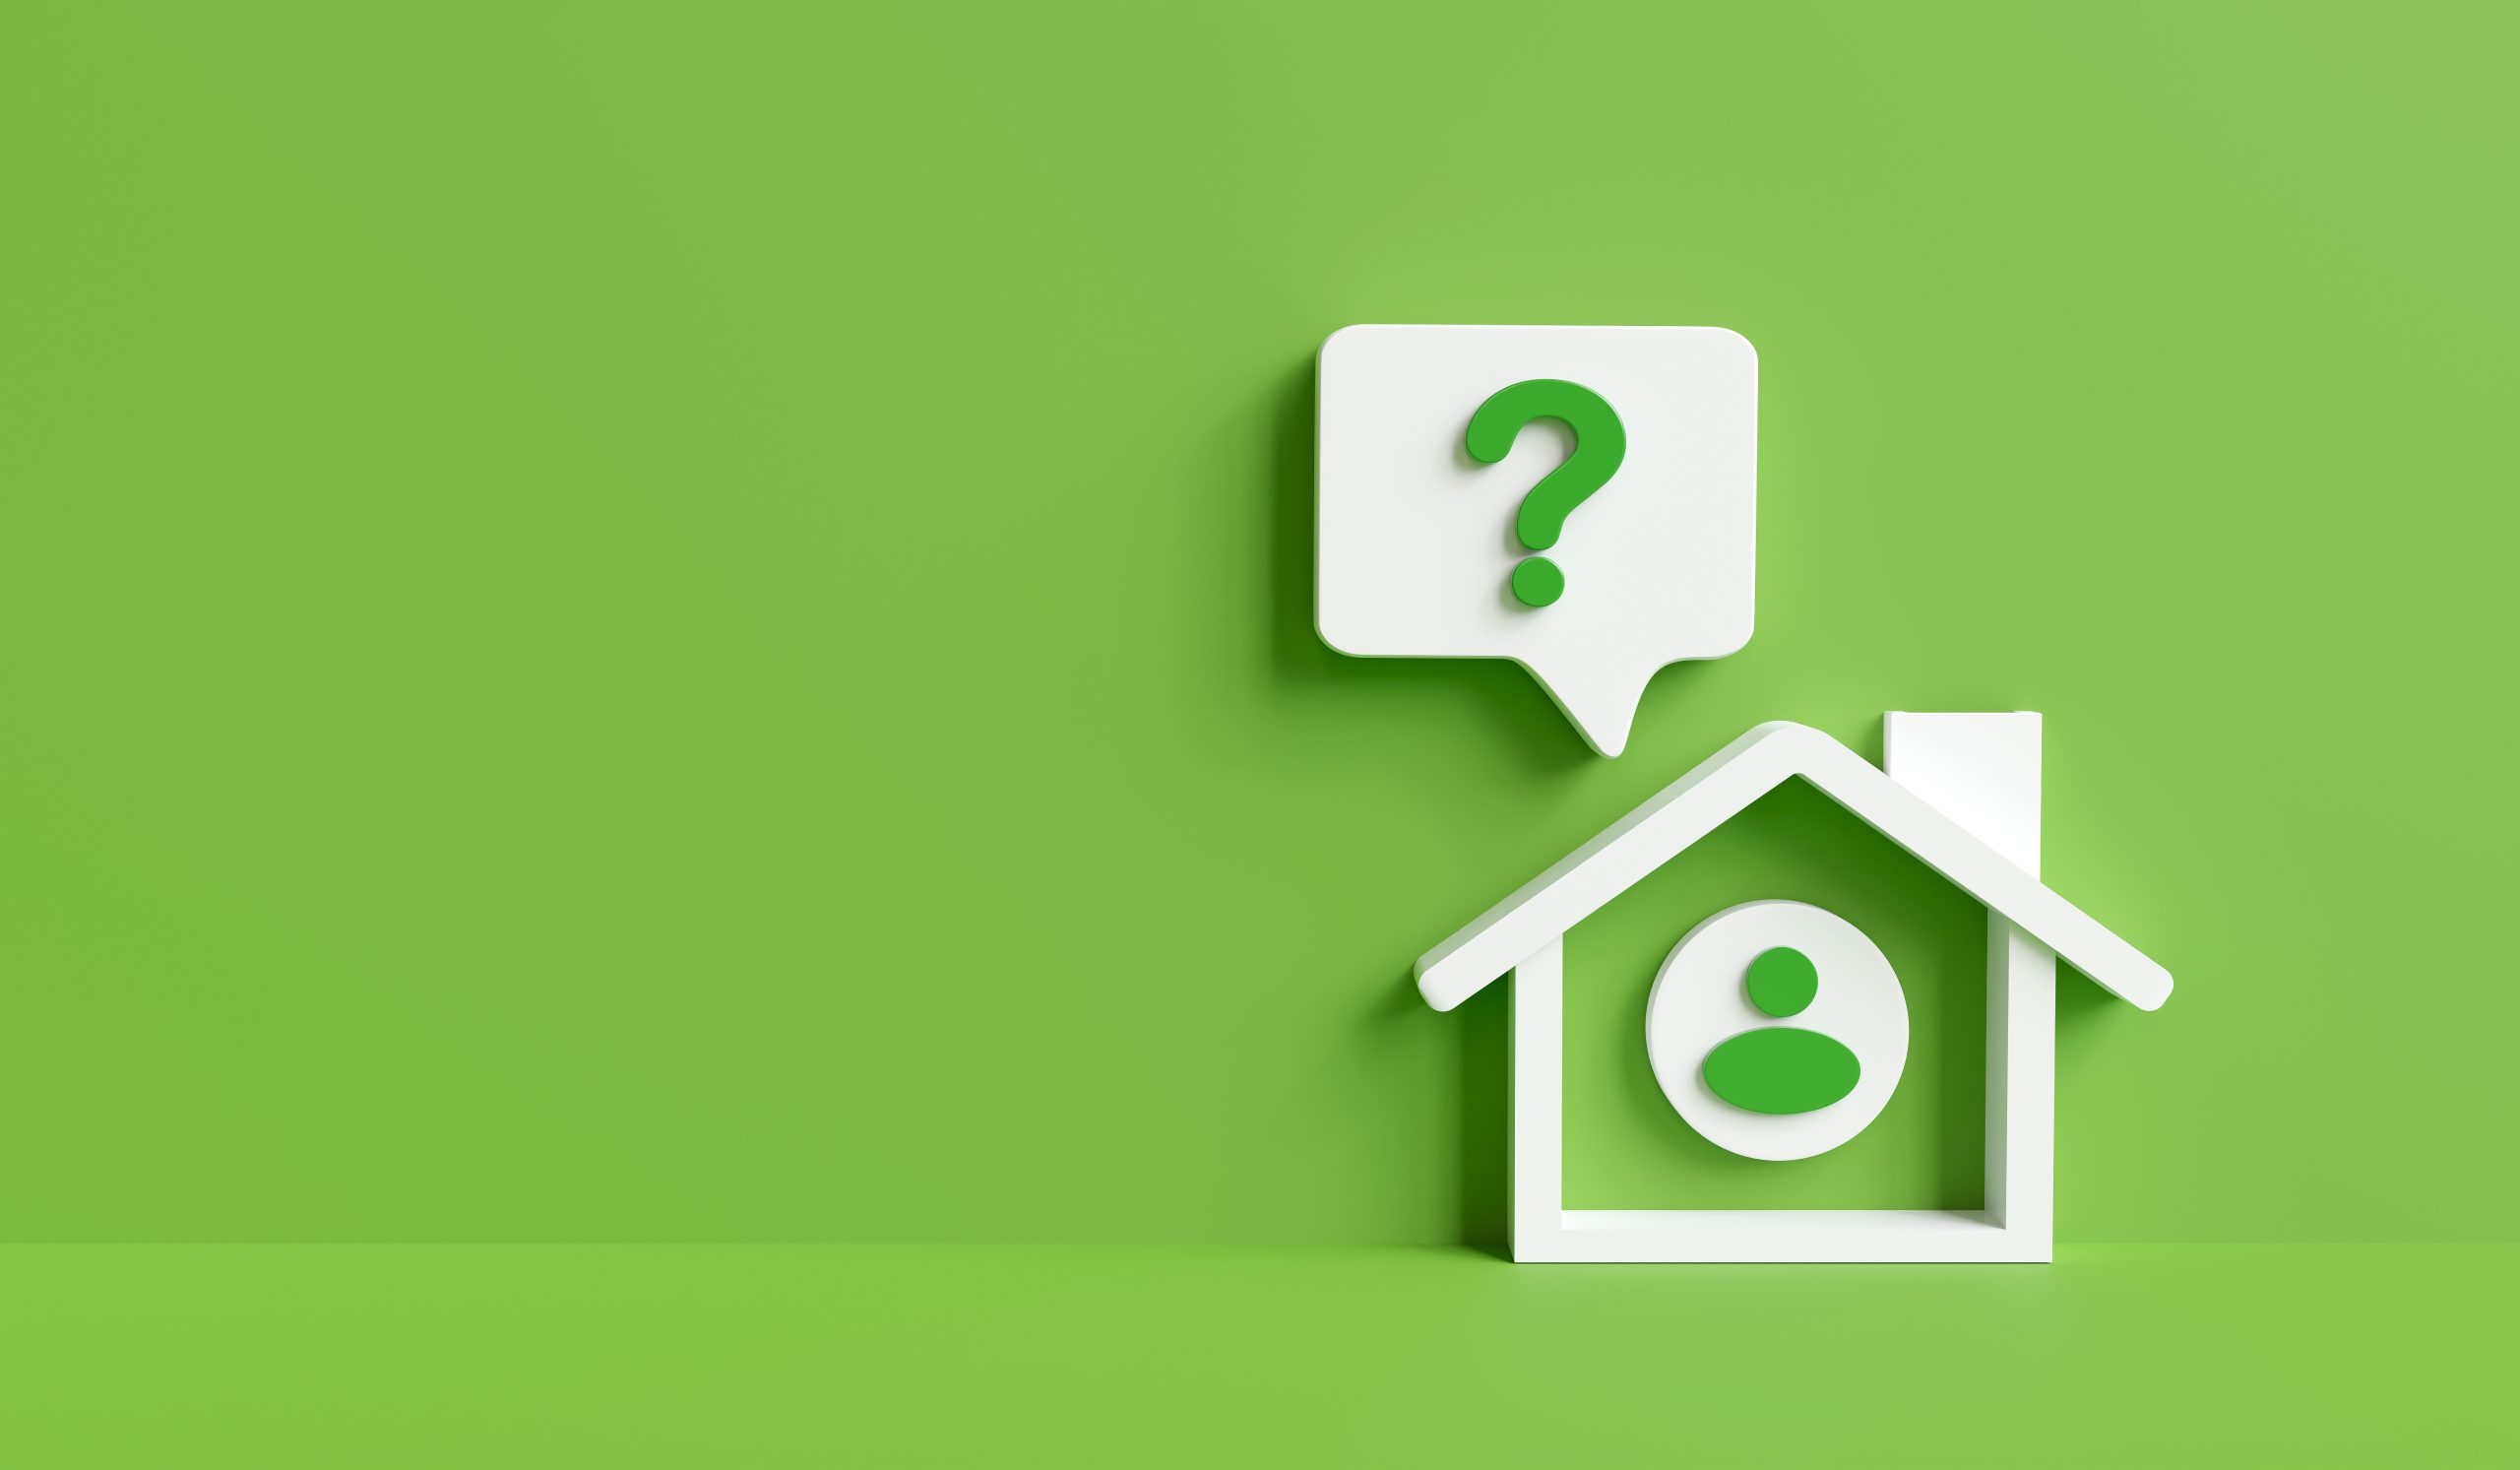 Home insulation company answering questions